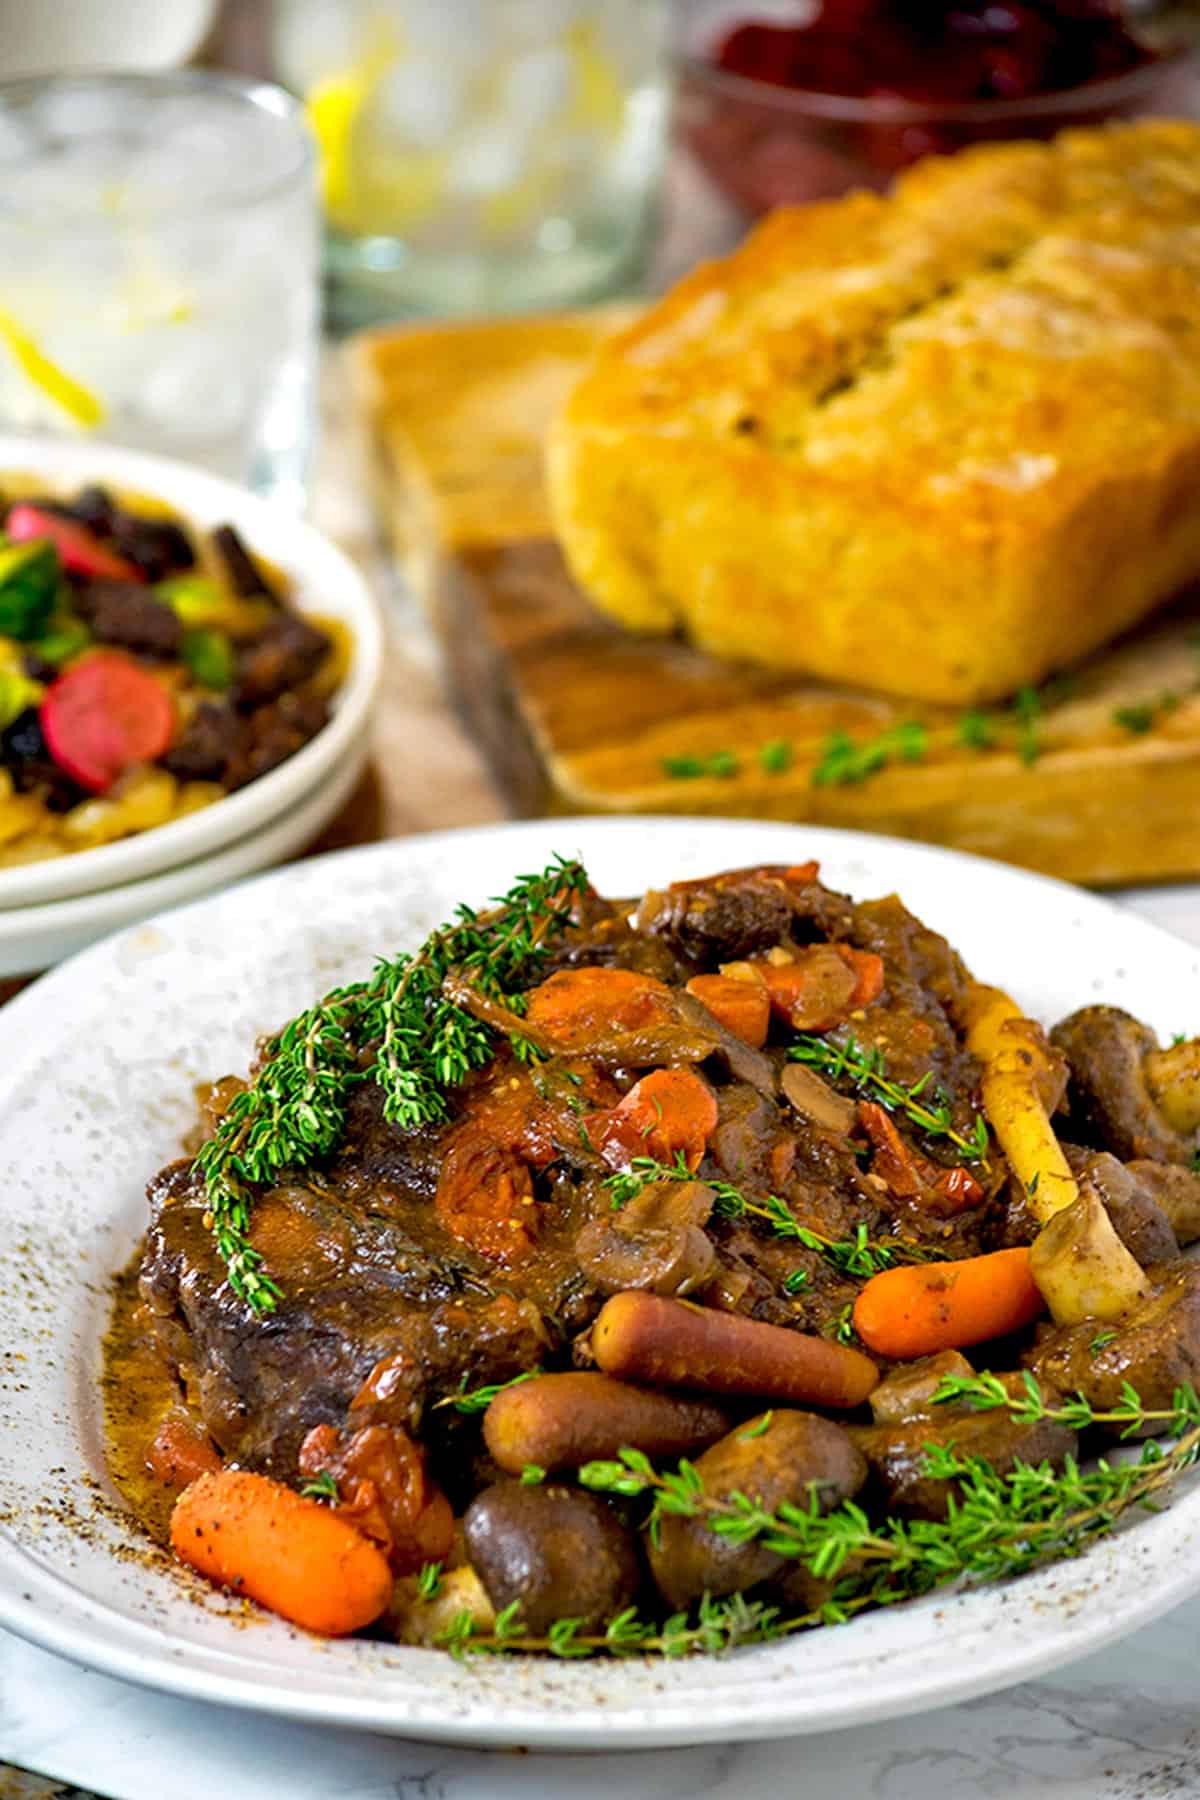 A plate of braised beef with fresh thyme and vegetables.